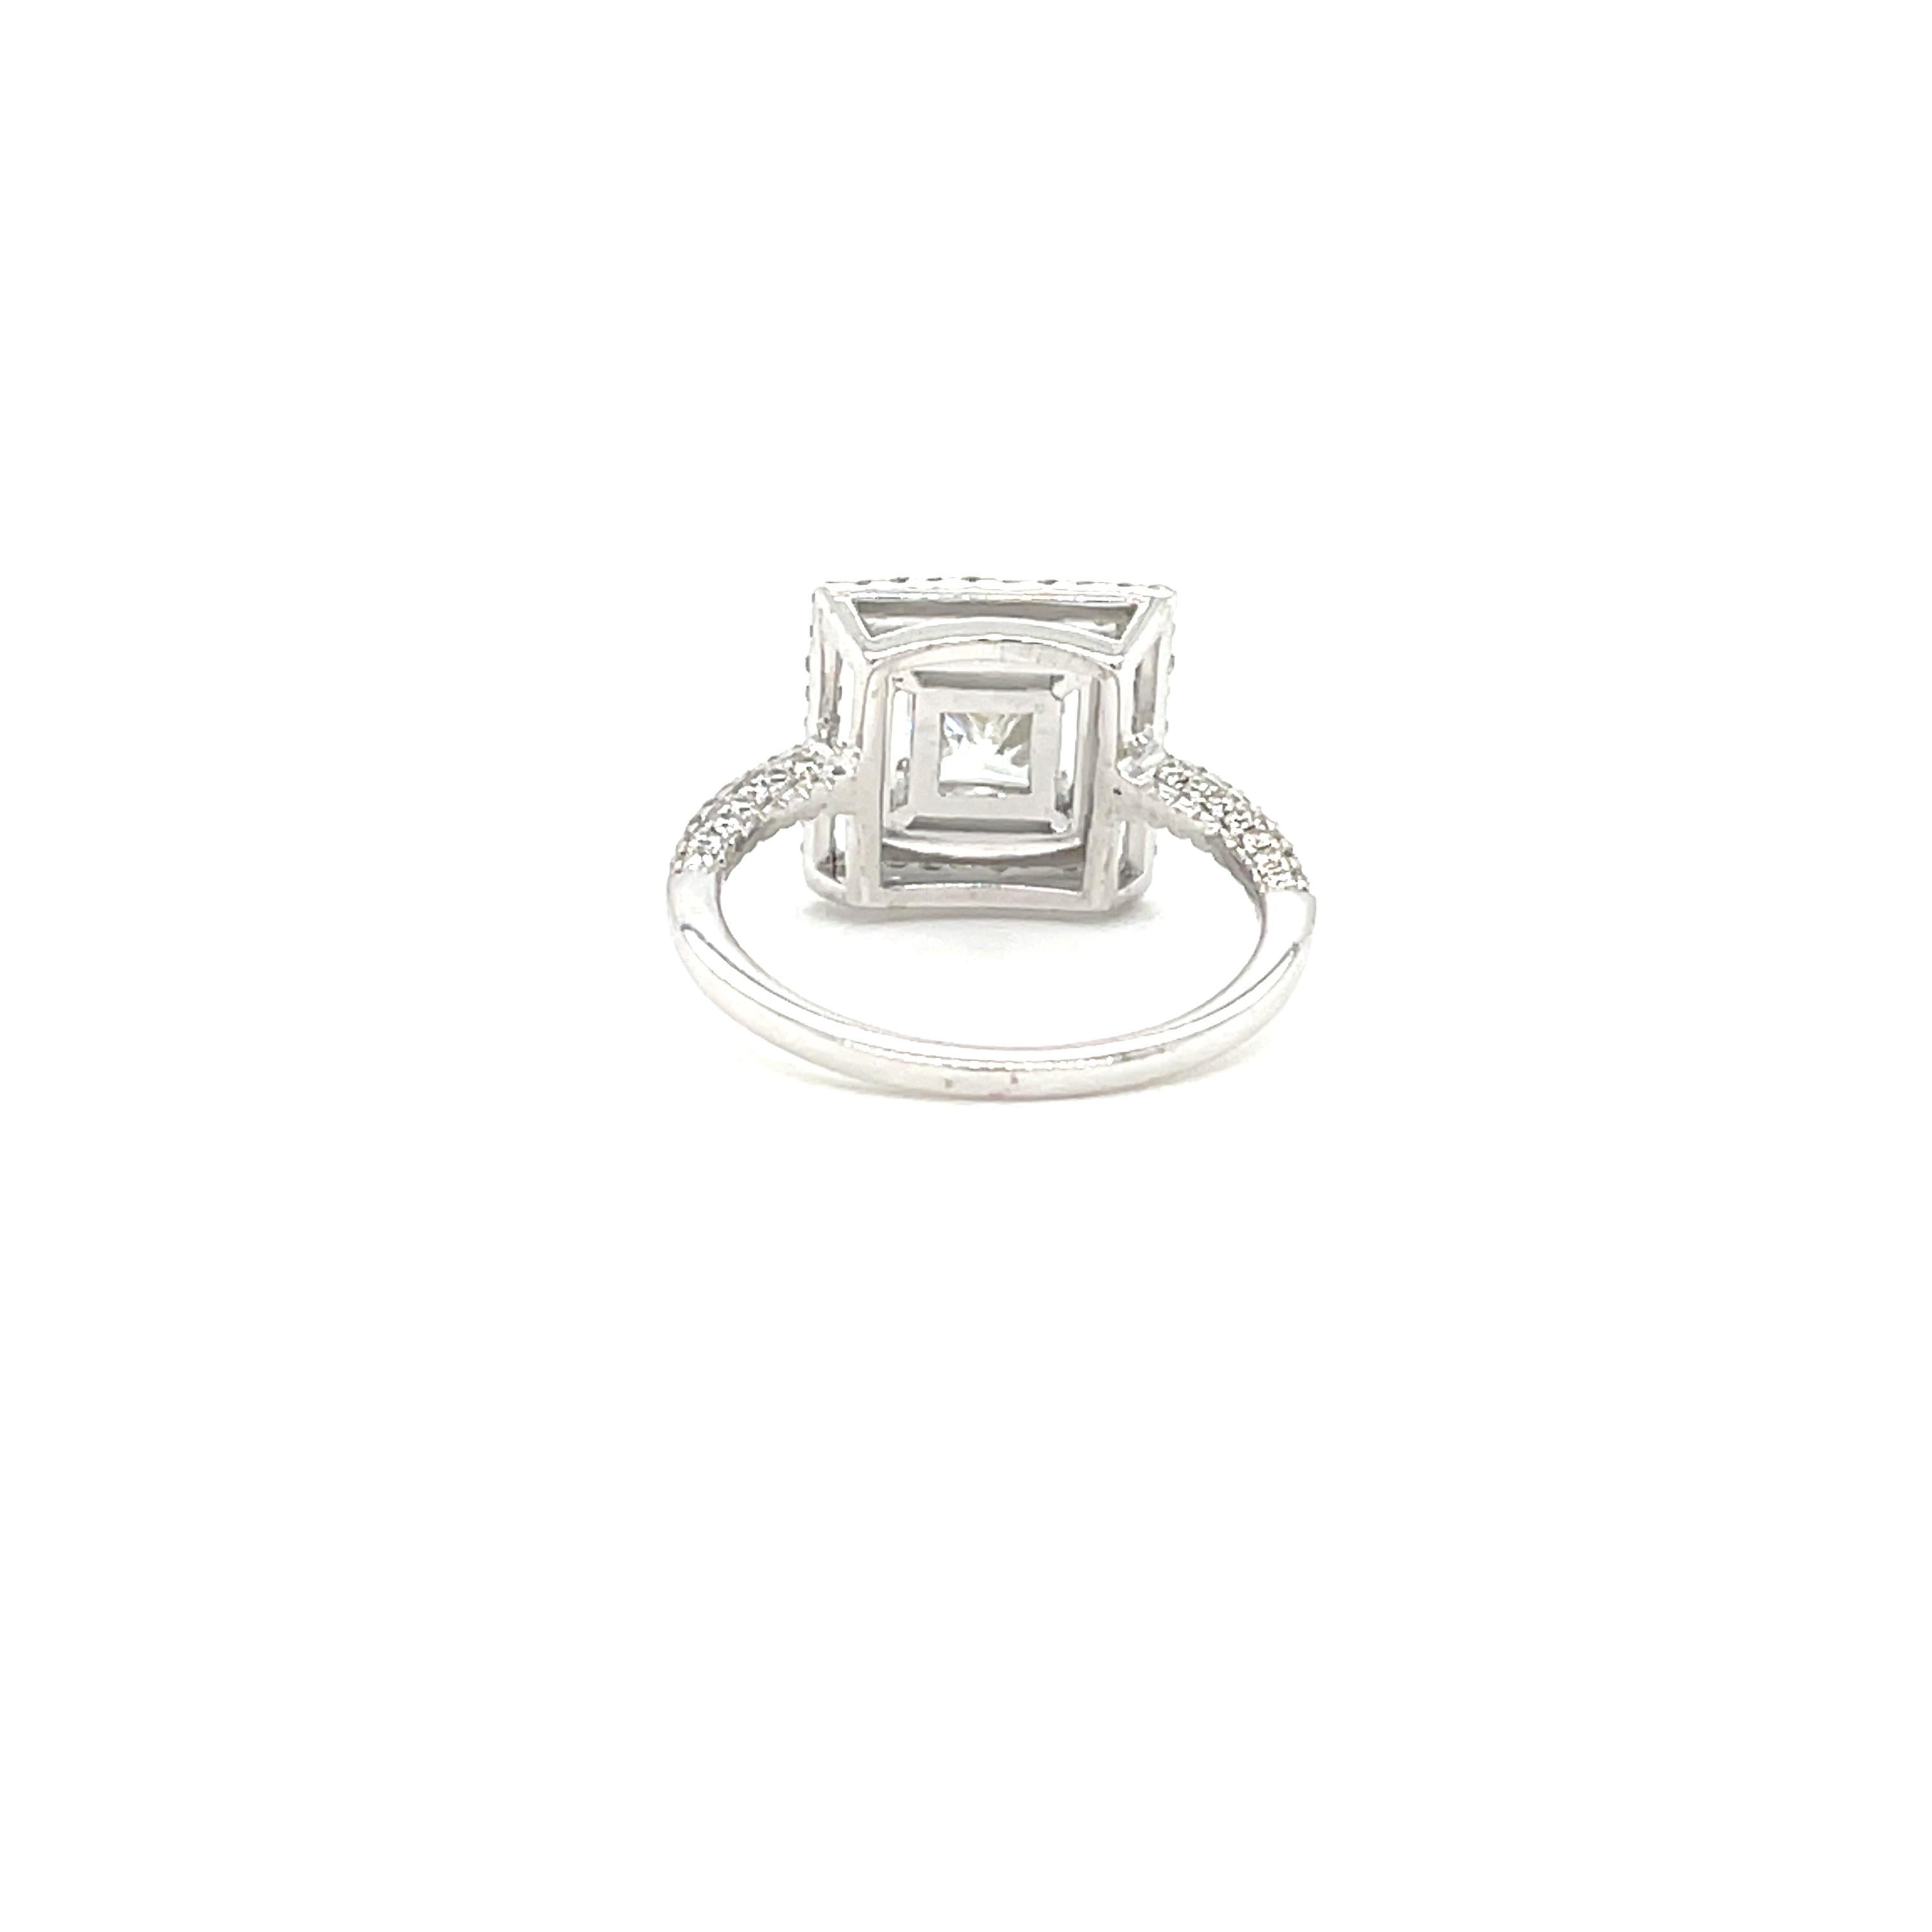 Contemporary GIA Certified Princess Cut 1.01 Carat F VVS2 Diamond Ring in 18K White Gold For Sale